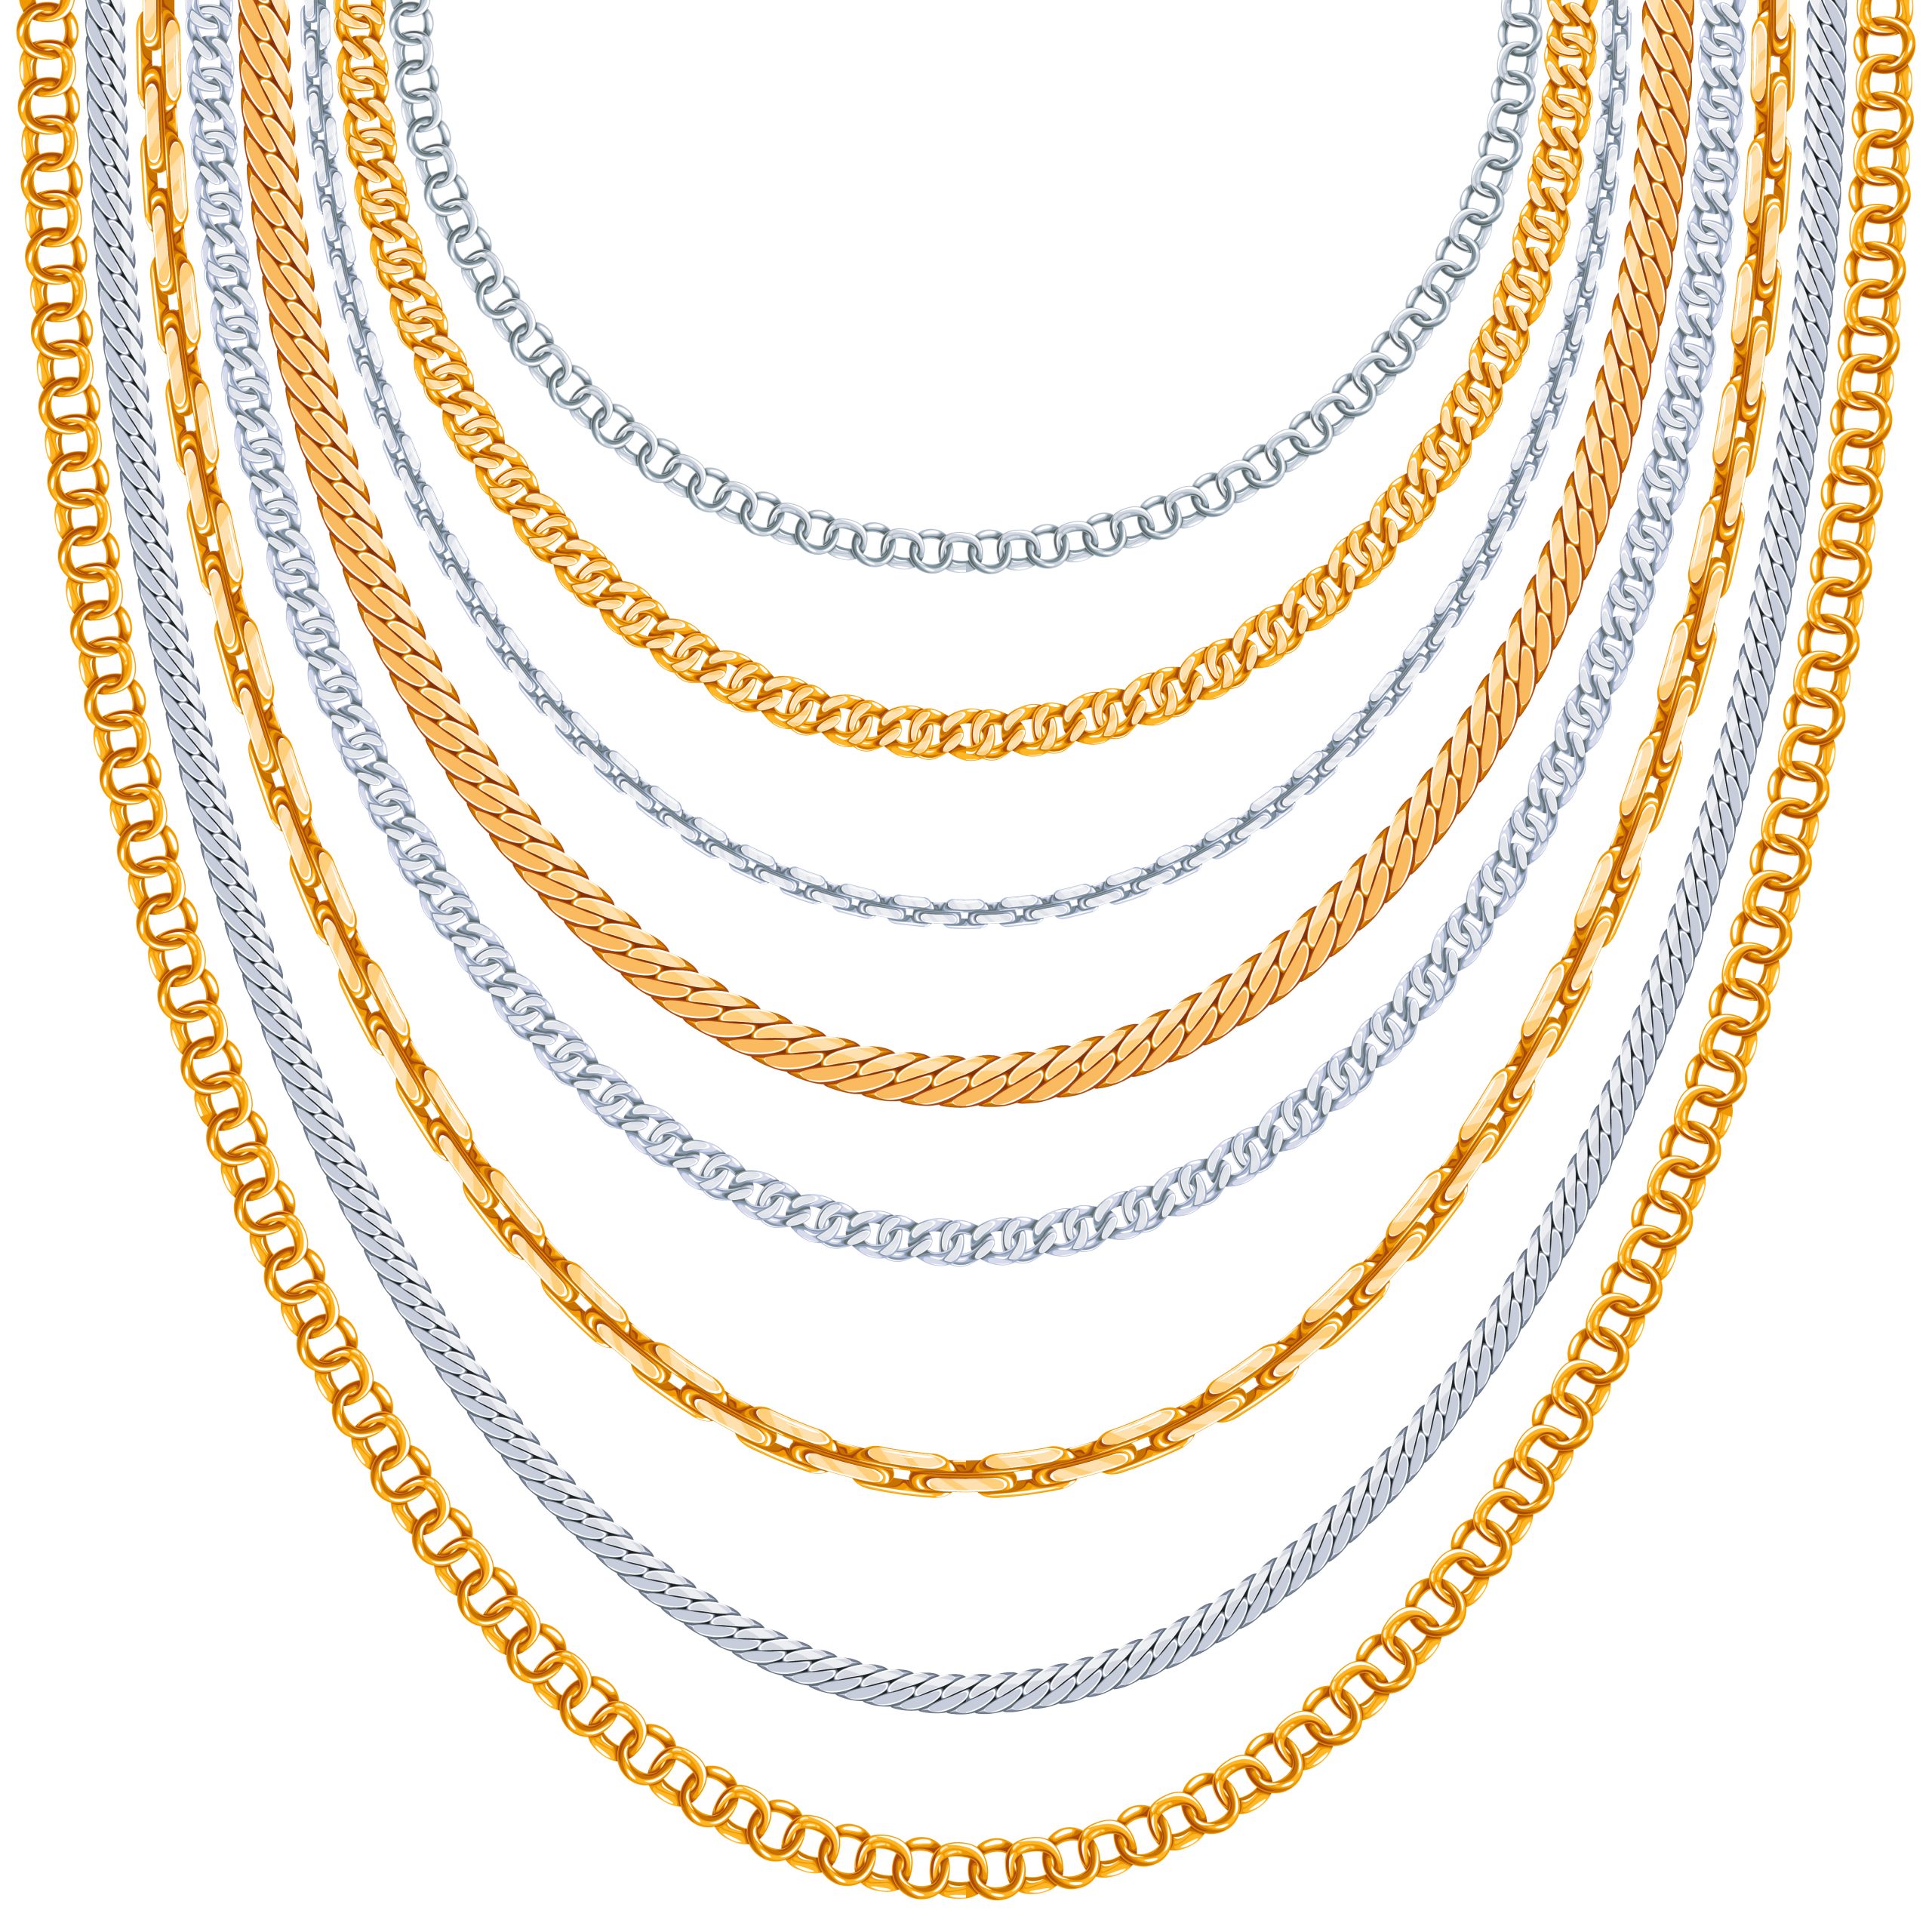 How to Choose the Best Gold Chain: Strongest and Weakest Gold Chains